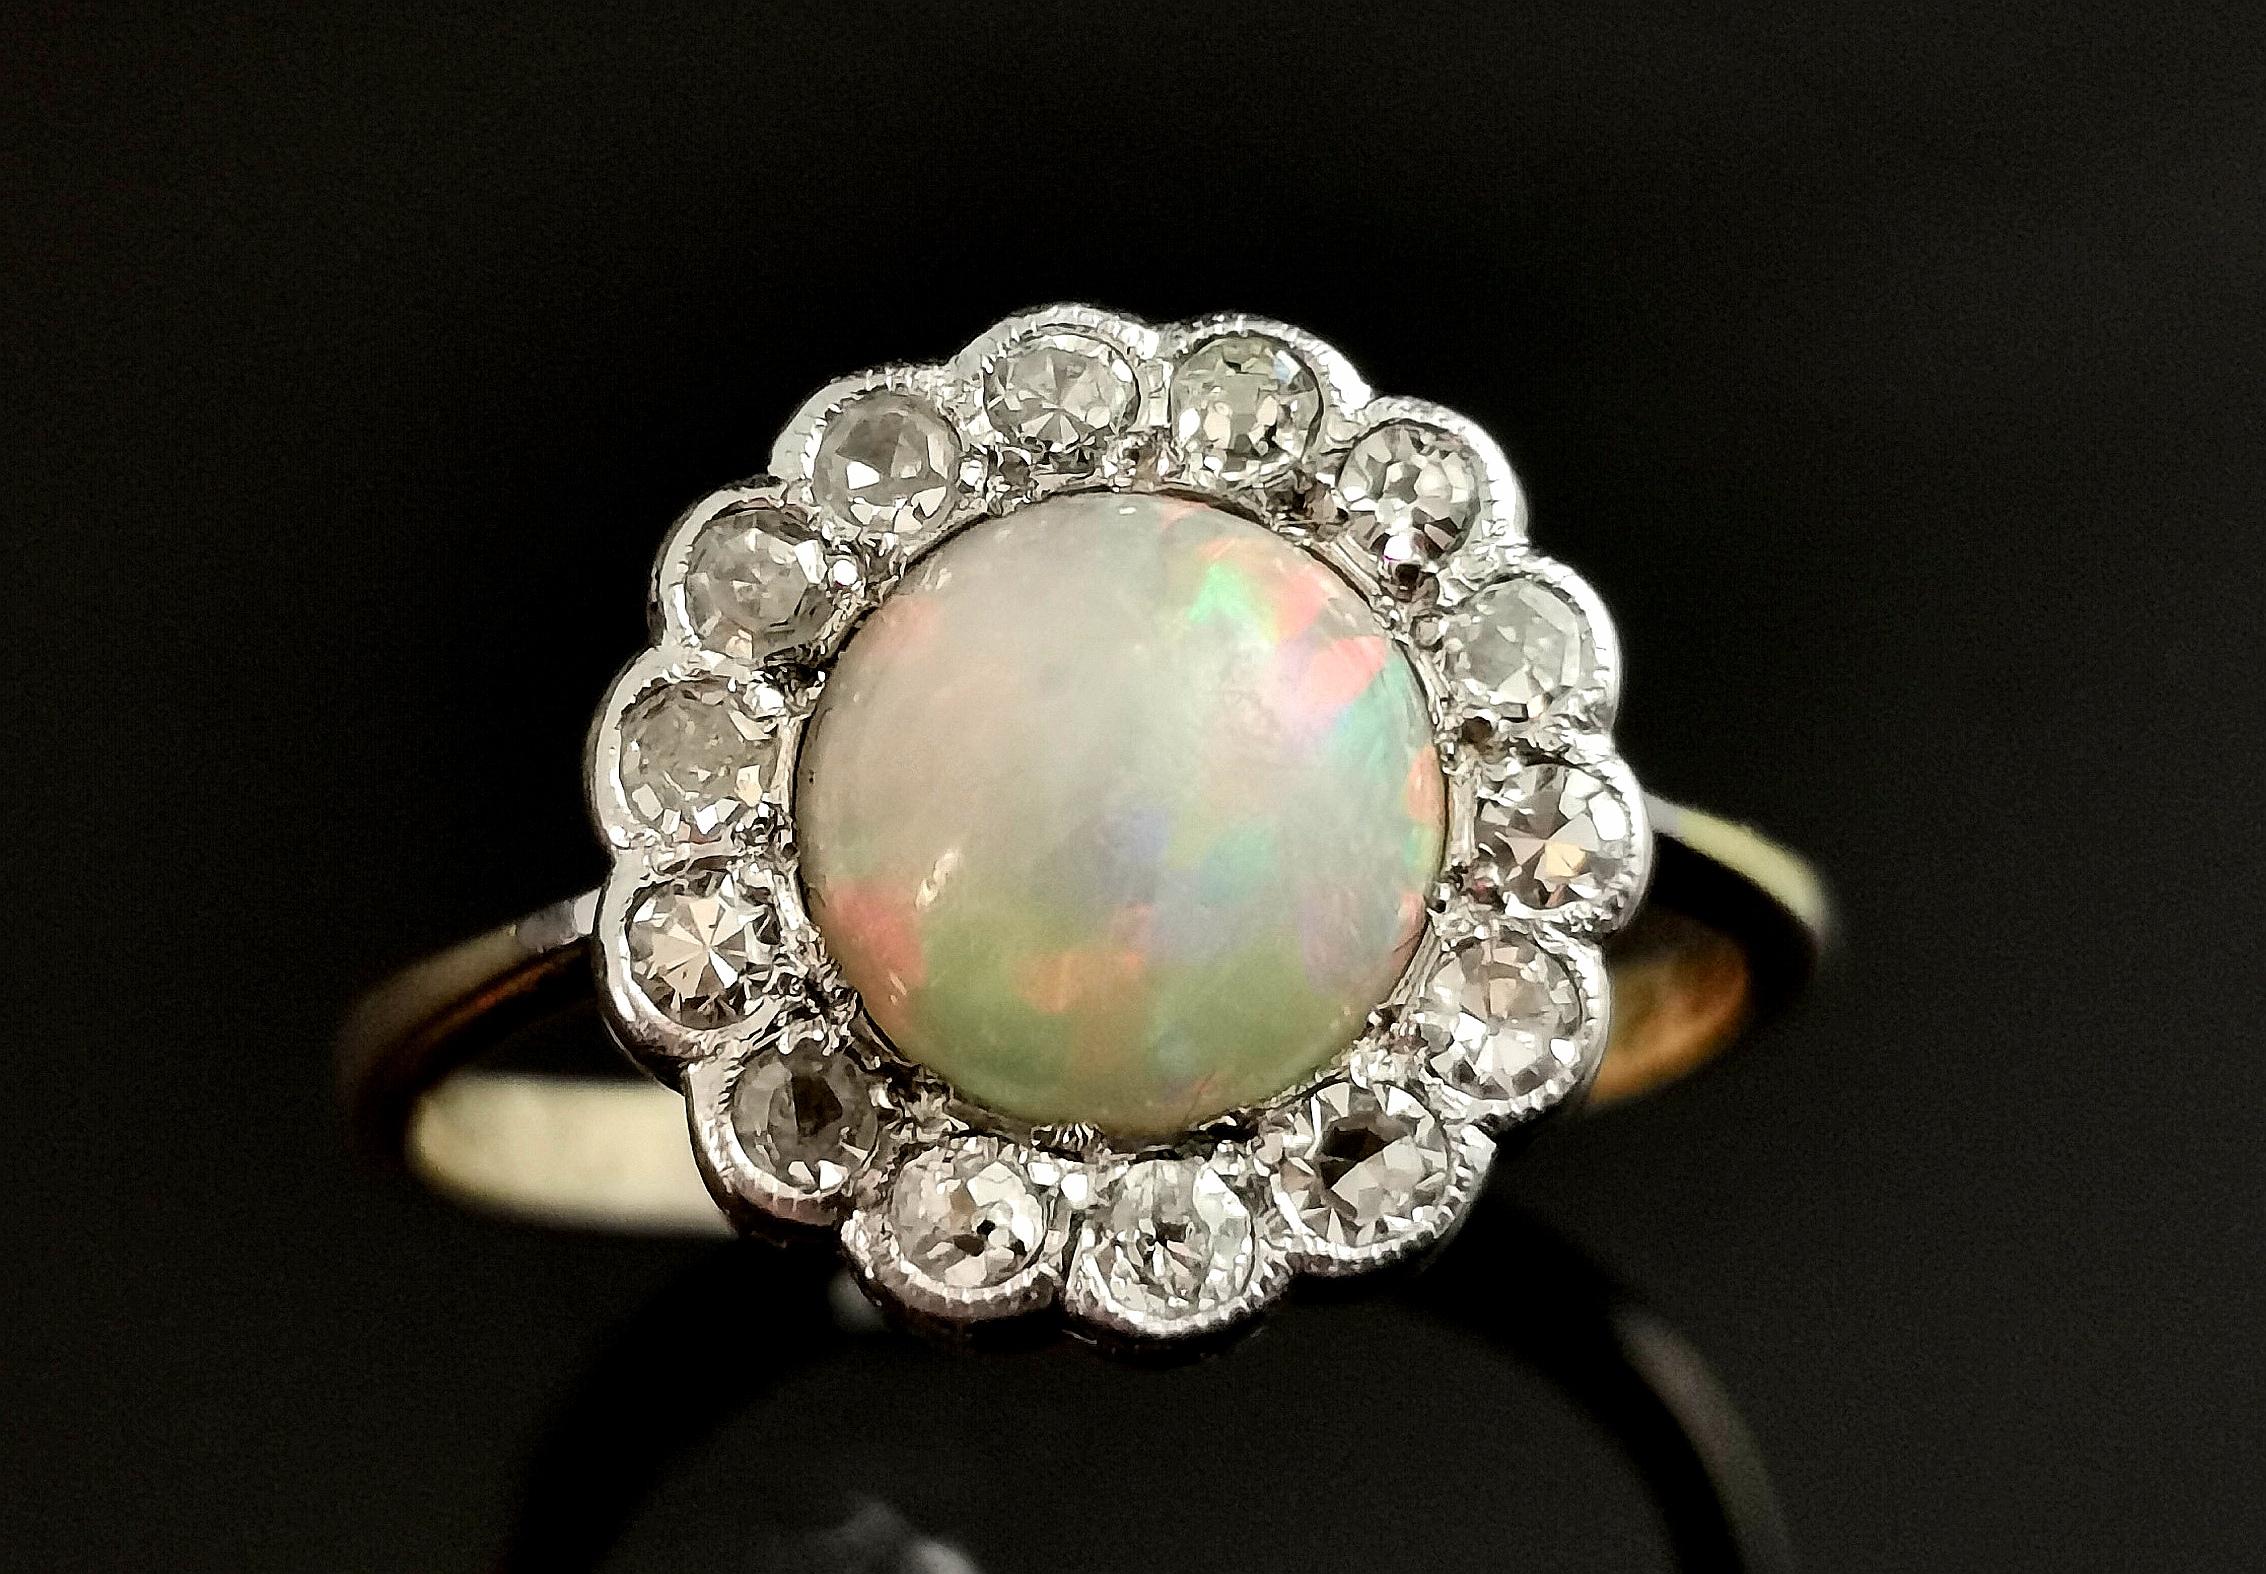 An absolutely gorgeous vintage, Art Deco era opal and diamond cluster ring.

A rich 18ct yellow gold band with a cluster style setting in cool platinum.

The face is set with a beautiful opal cabochon with a white body and a beautiful play of colour